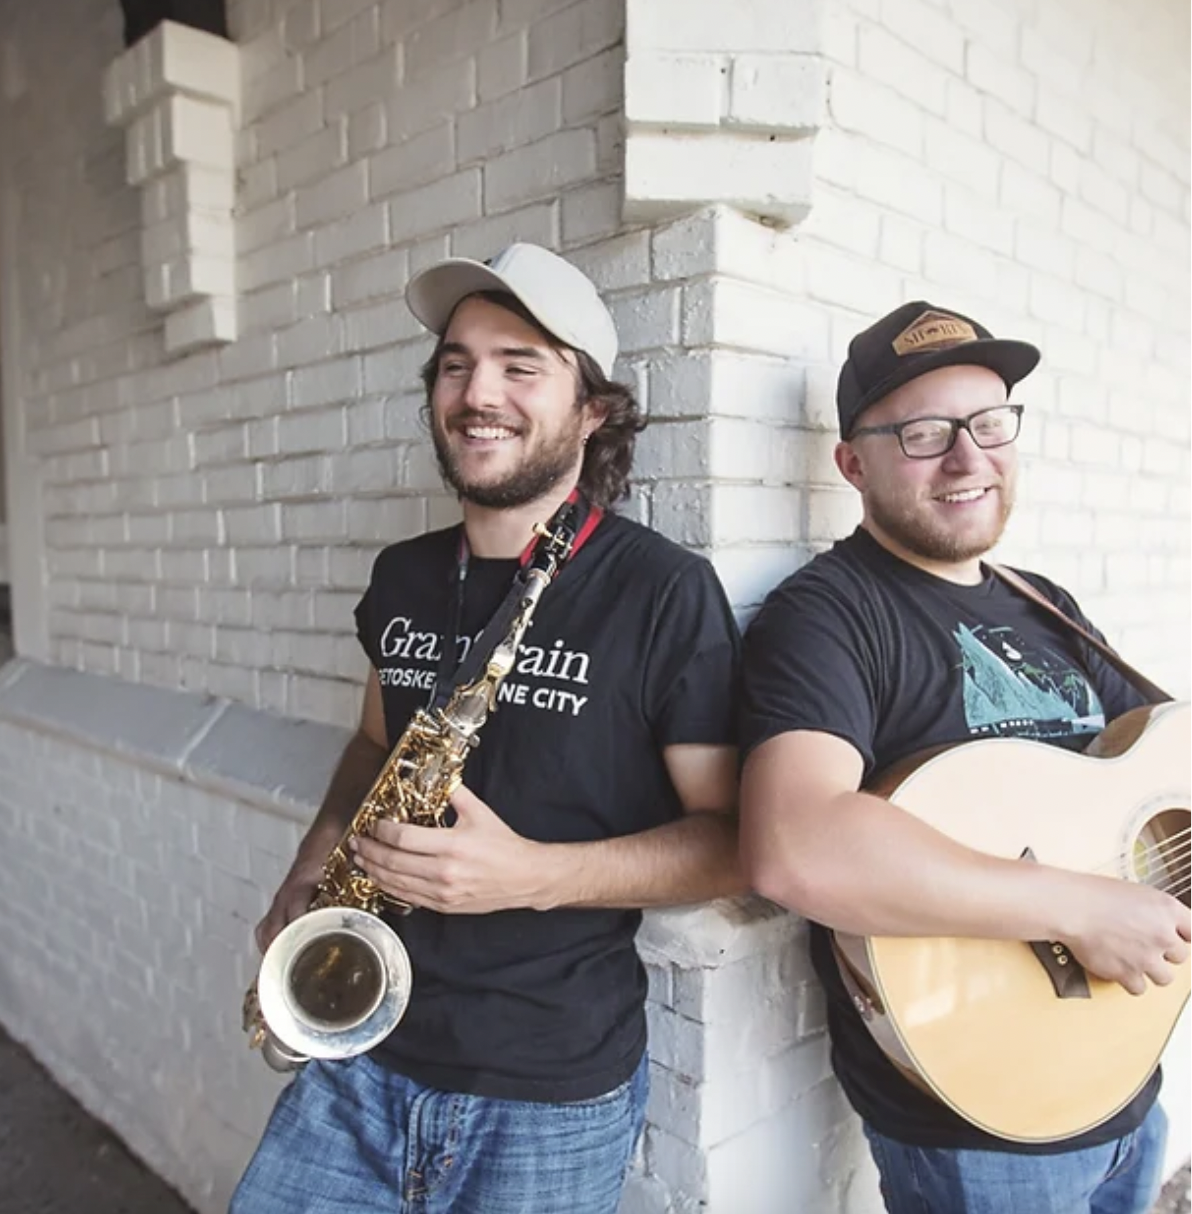 The Real Ingredients are an acoustic rock duo playing folk rock and rootsy Americana performing on Aug. 17 as part of Charlevoix's Thursday night concert series.